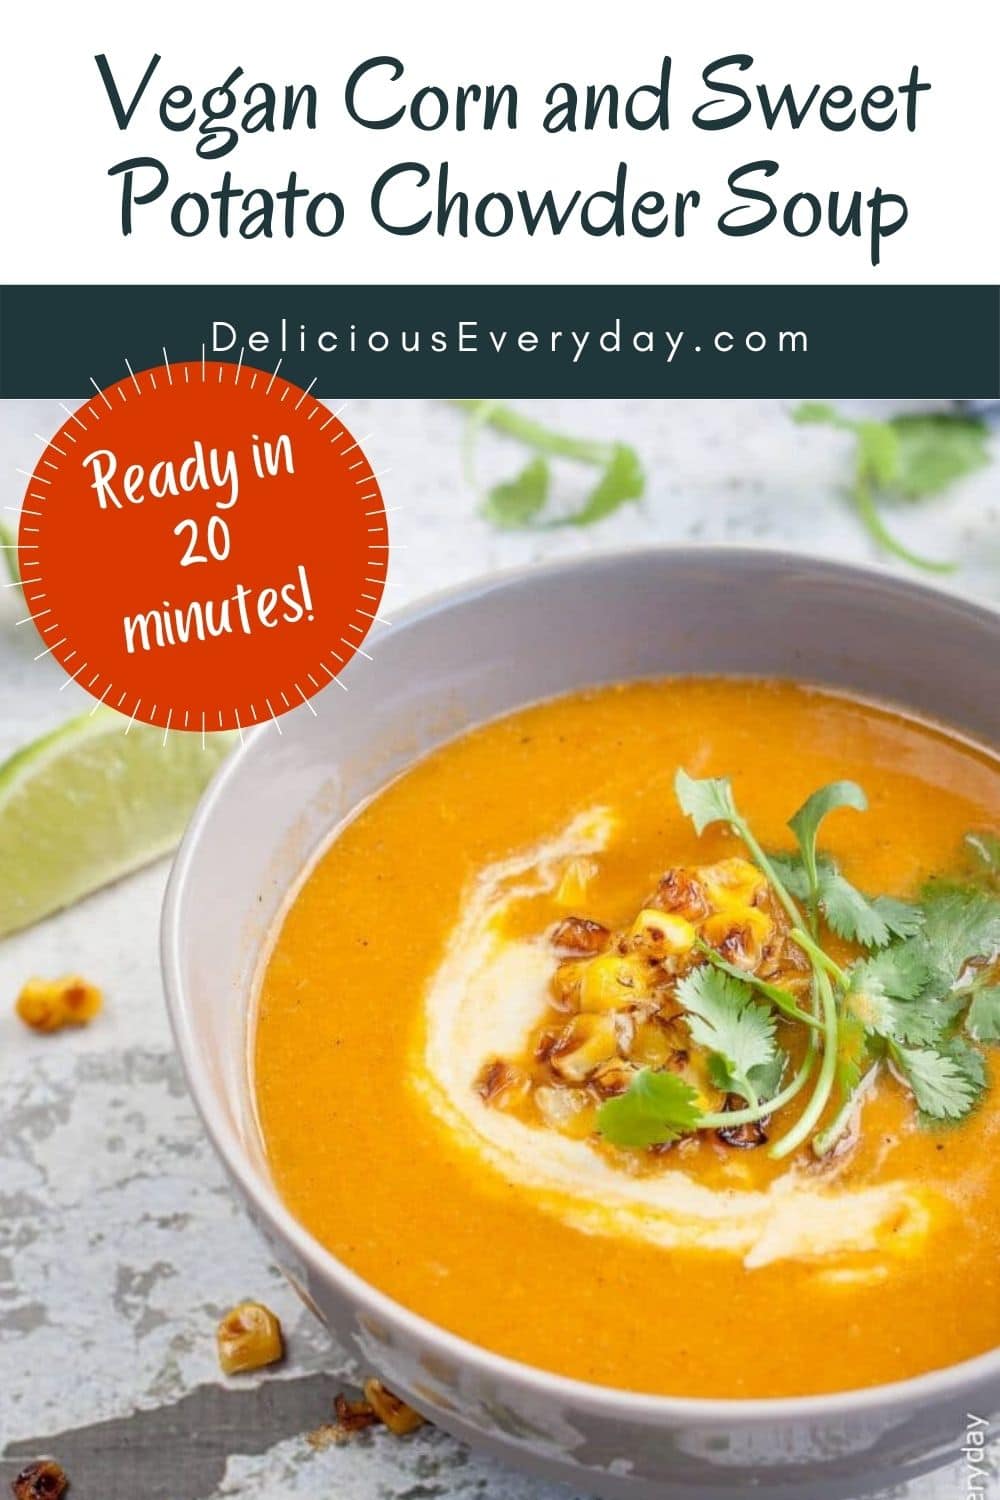 Vegan Corn and Sweet Potato Chowder Soup | Delicious Everyday